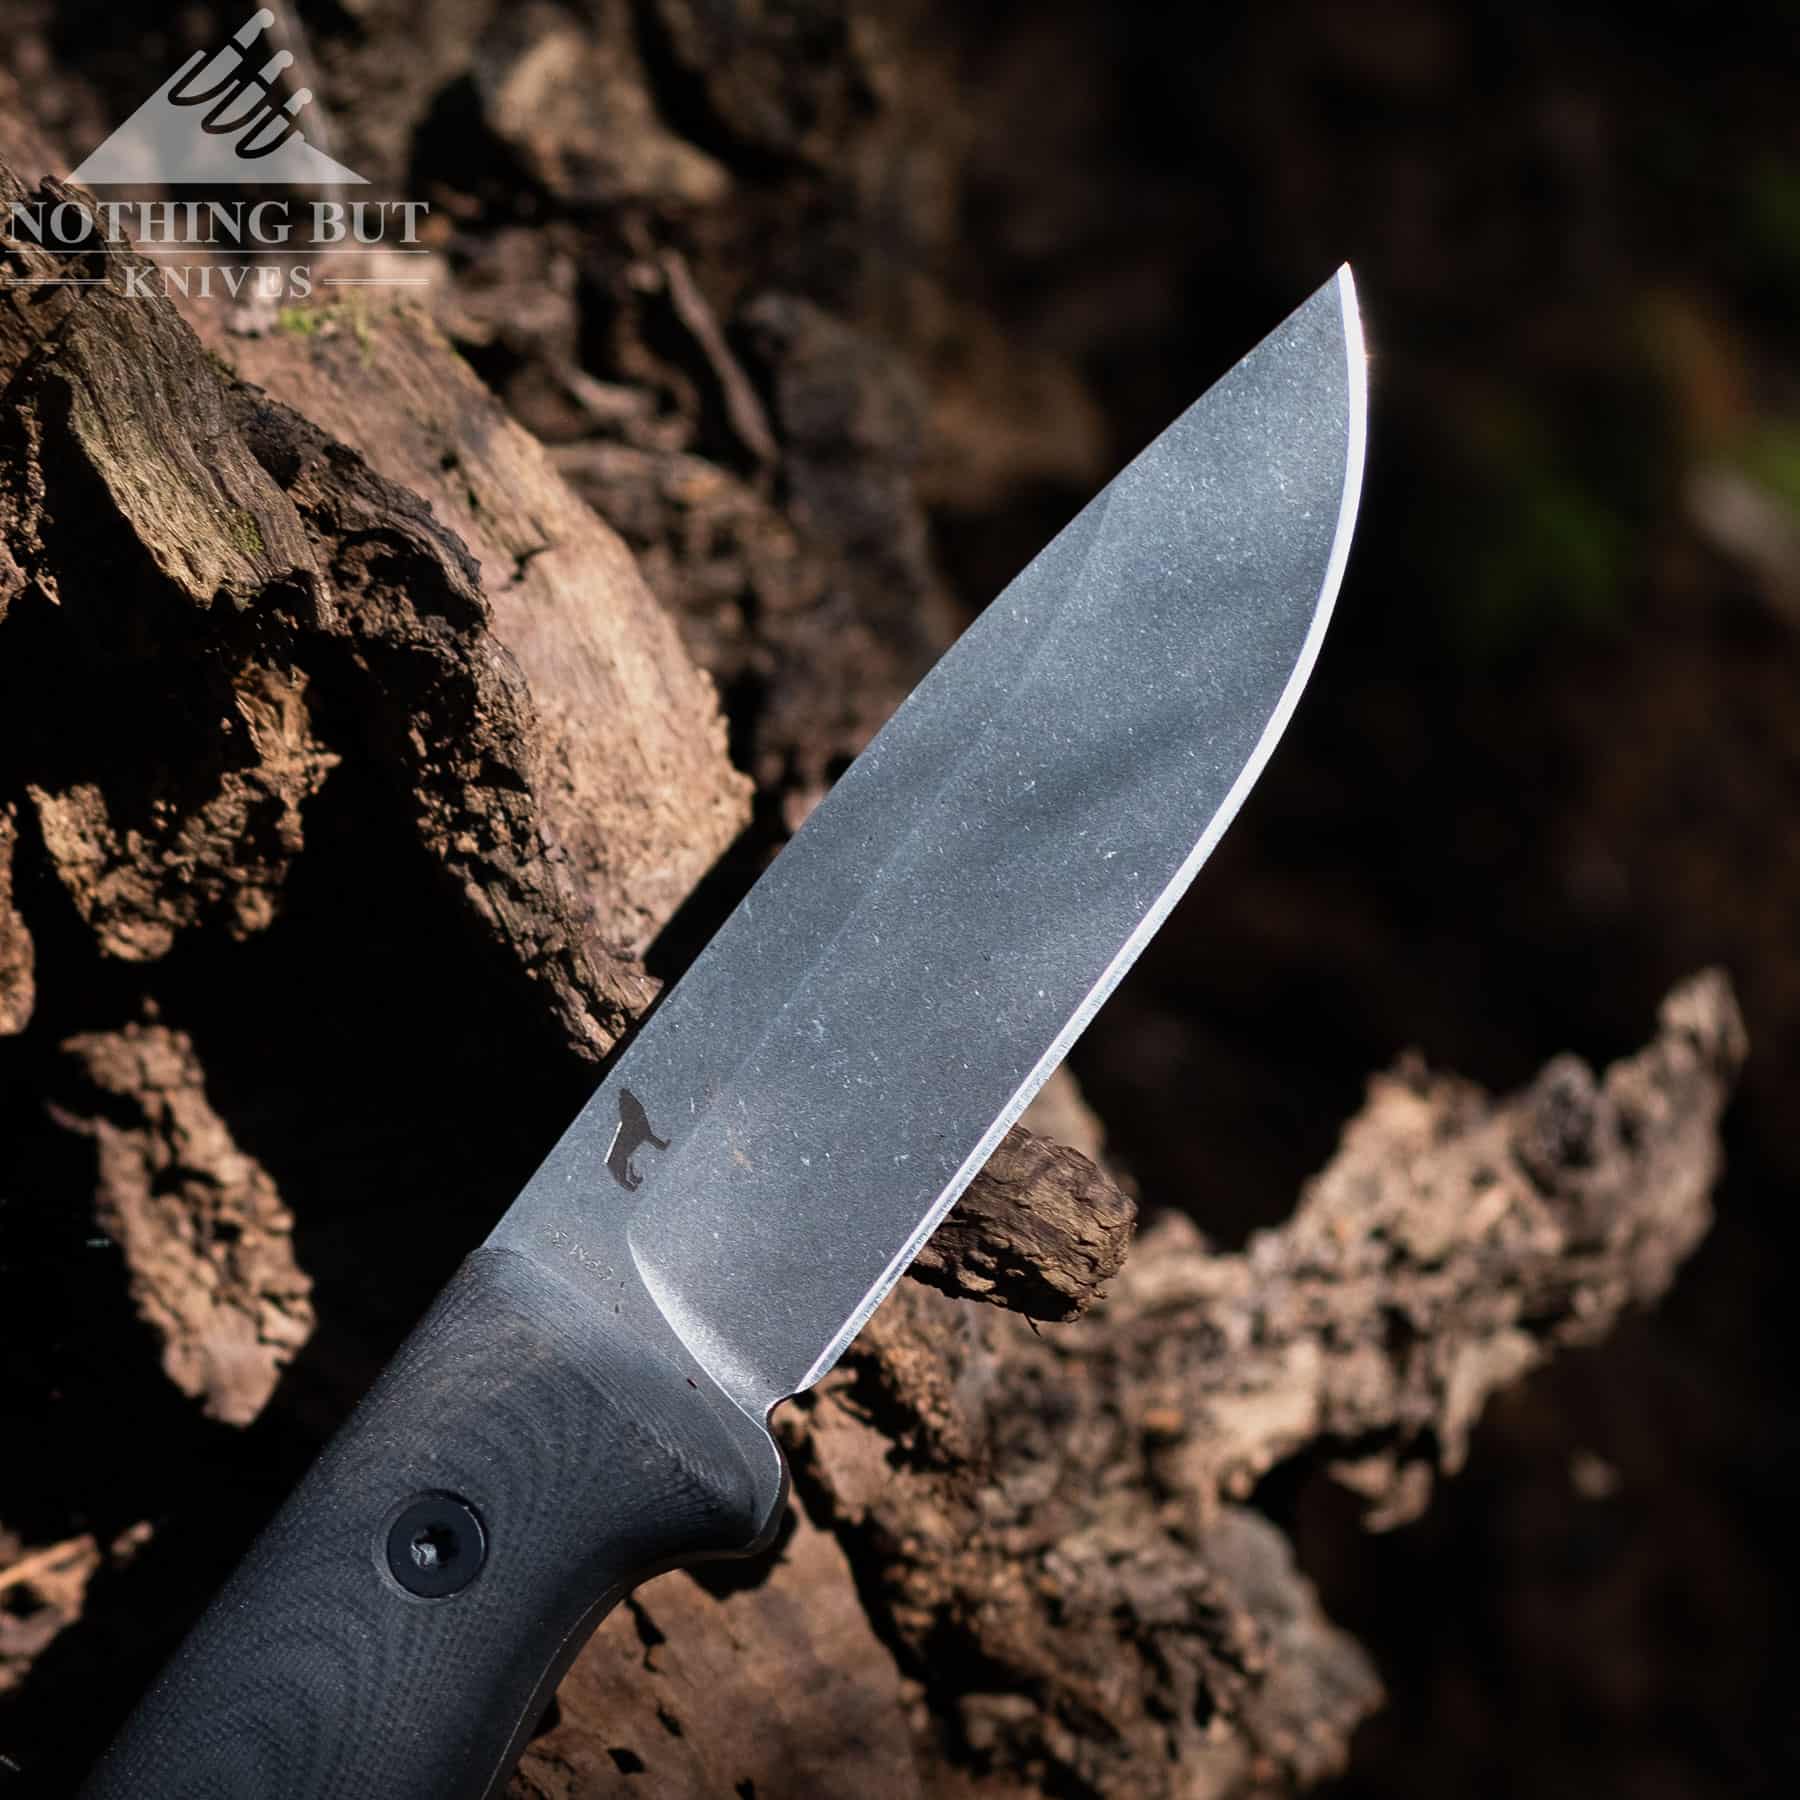 The Reiff F4 has an excellent blade for a variety of survival or bushcraft tasks. 